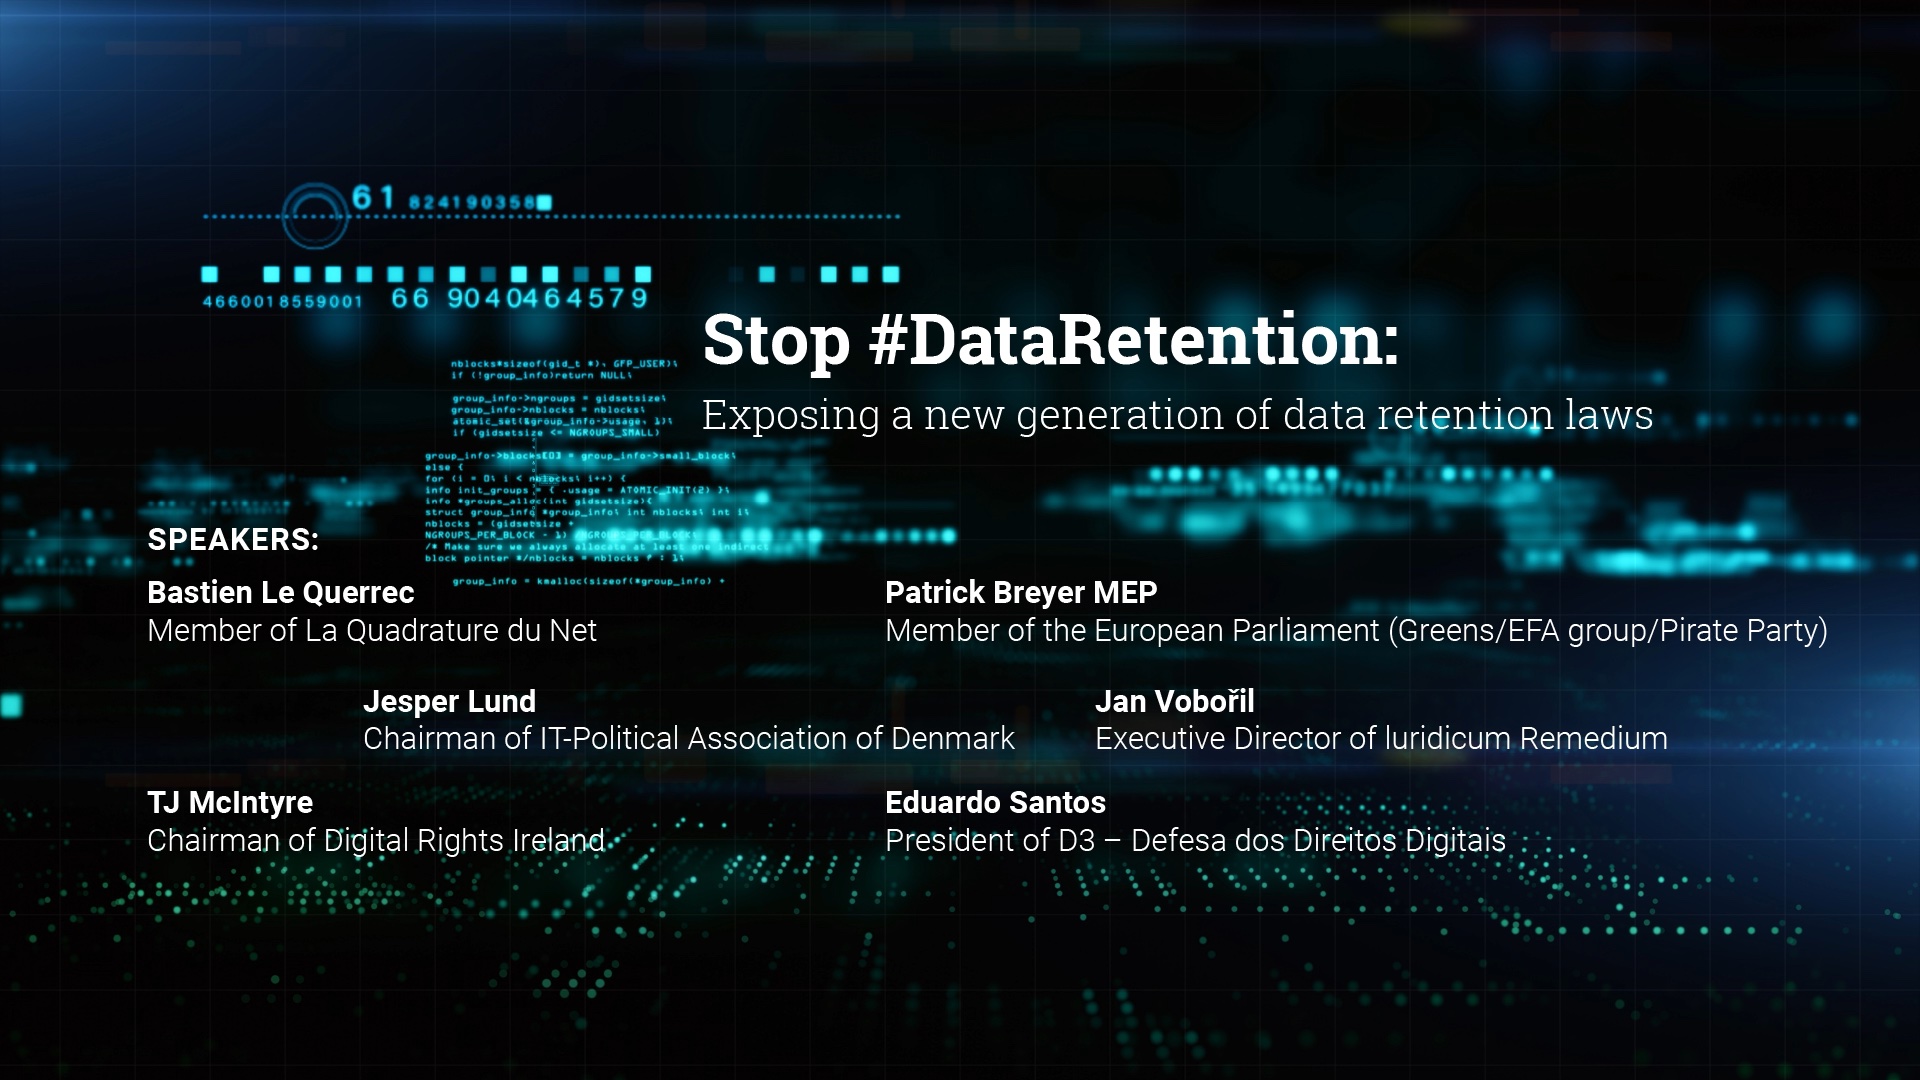 Stop #DataRetention: Exposing a New Generation of Data Retention Laws